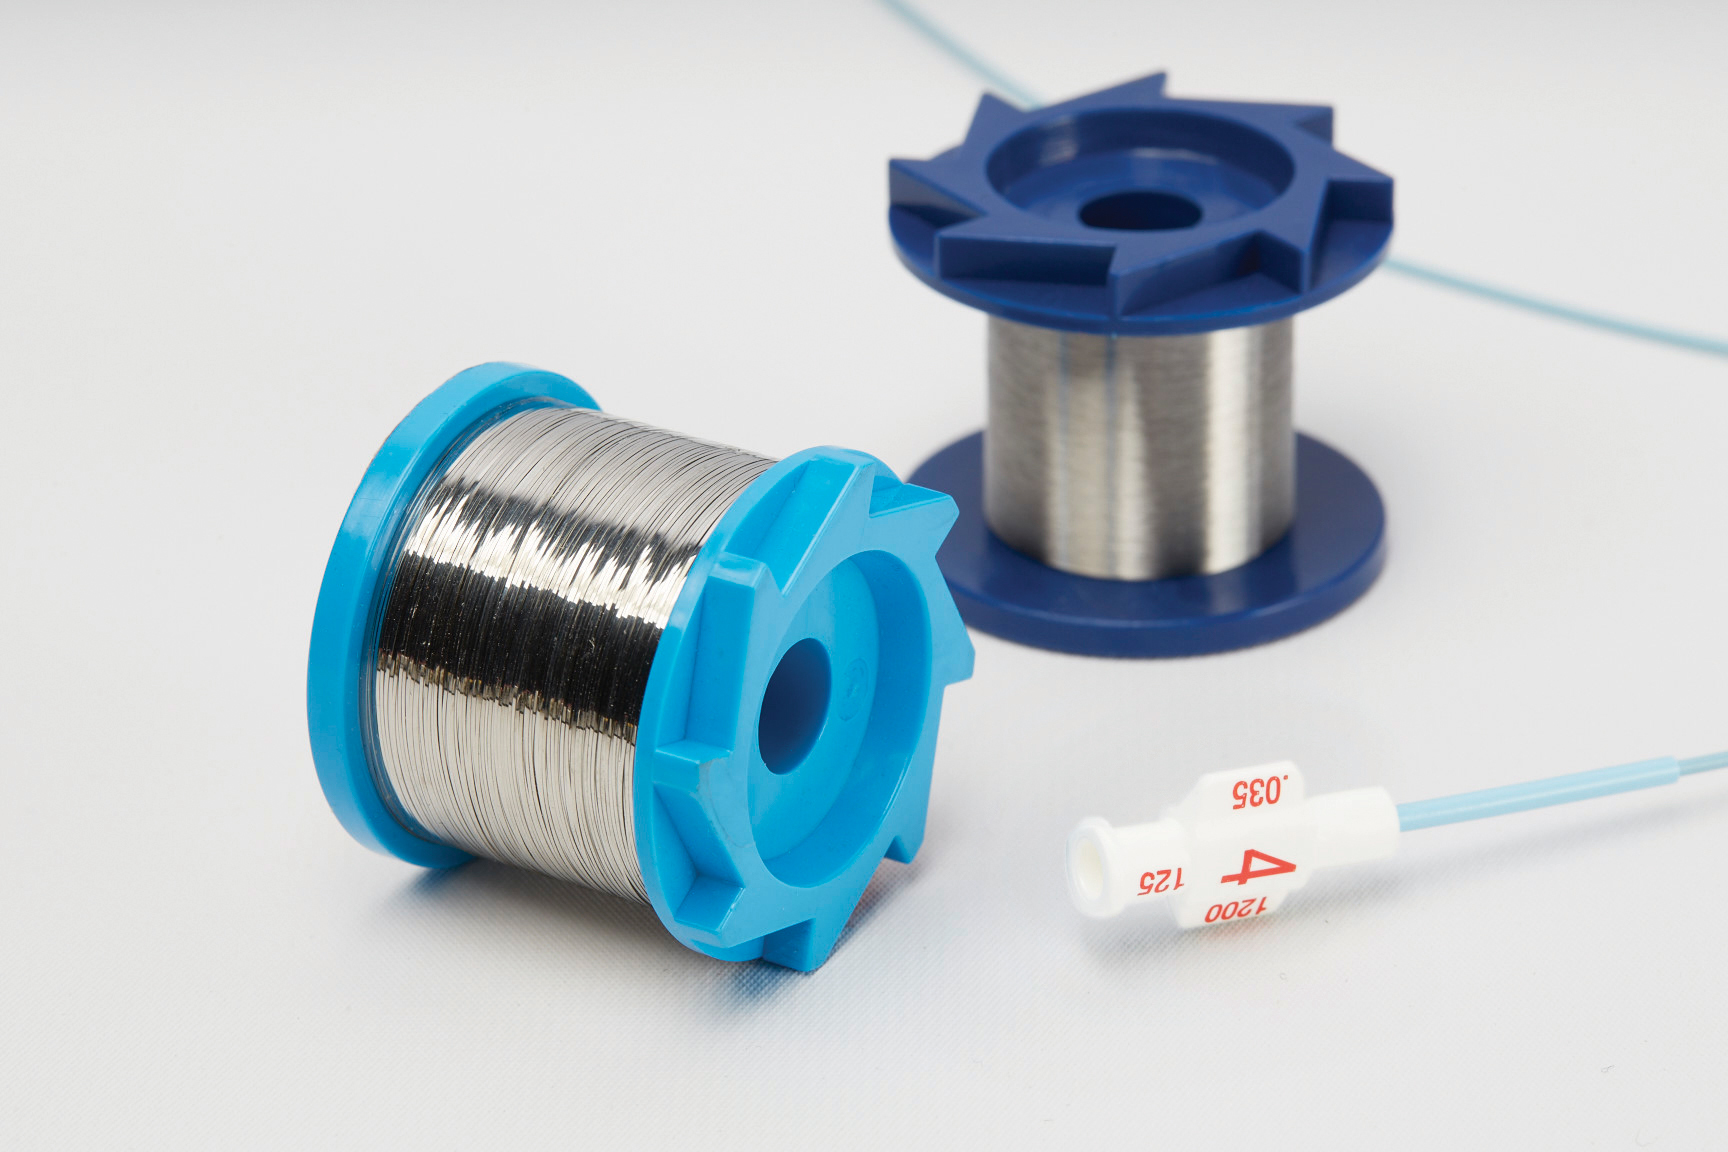 High-Quality Steel & Nickel Alloys for Catheters of Any Shape and Size